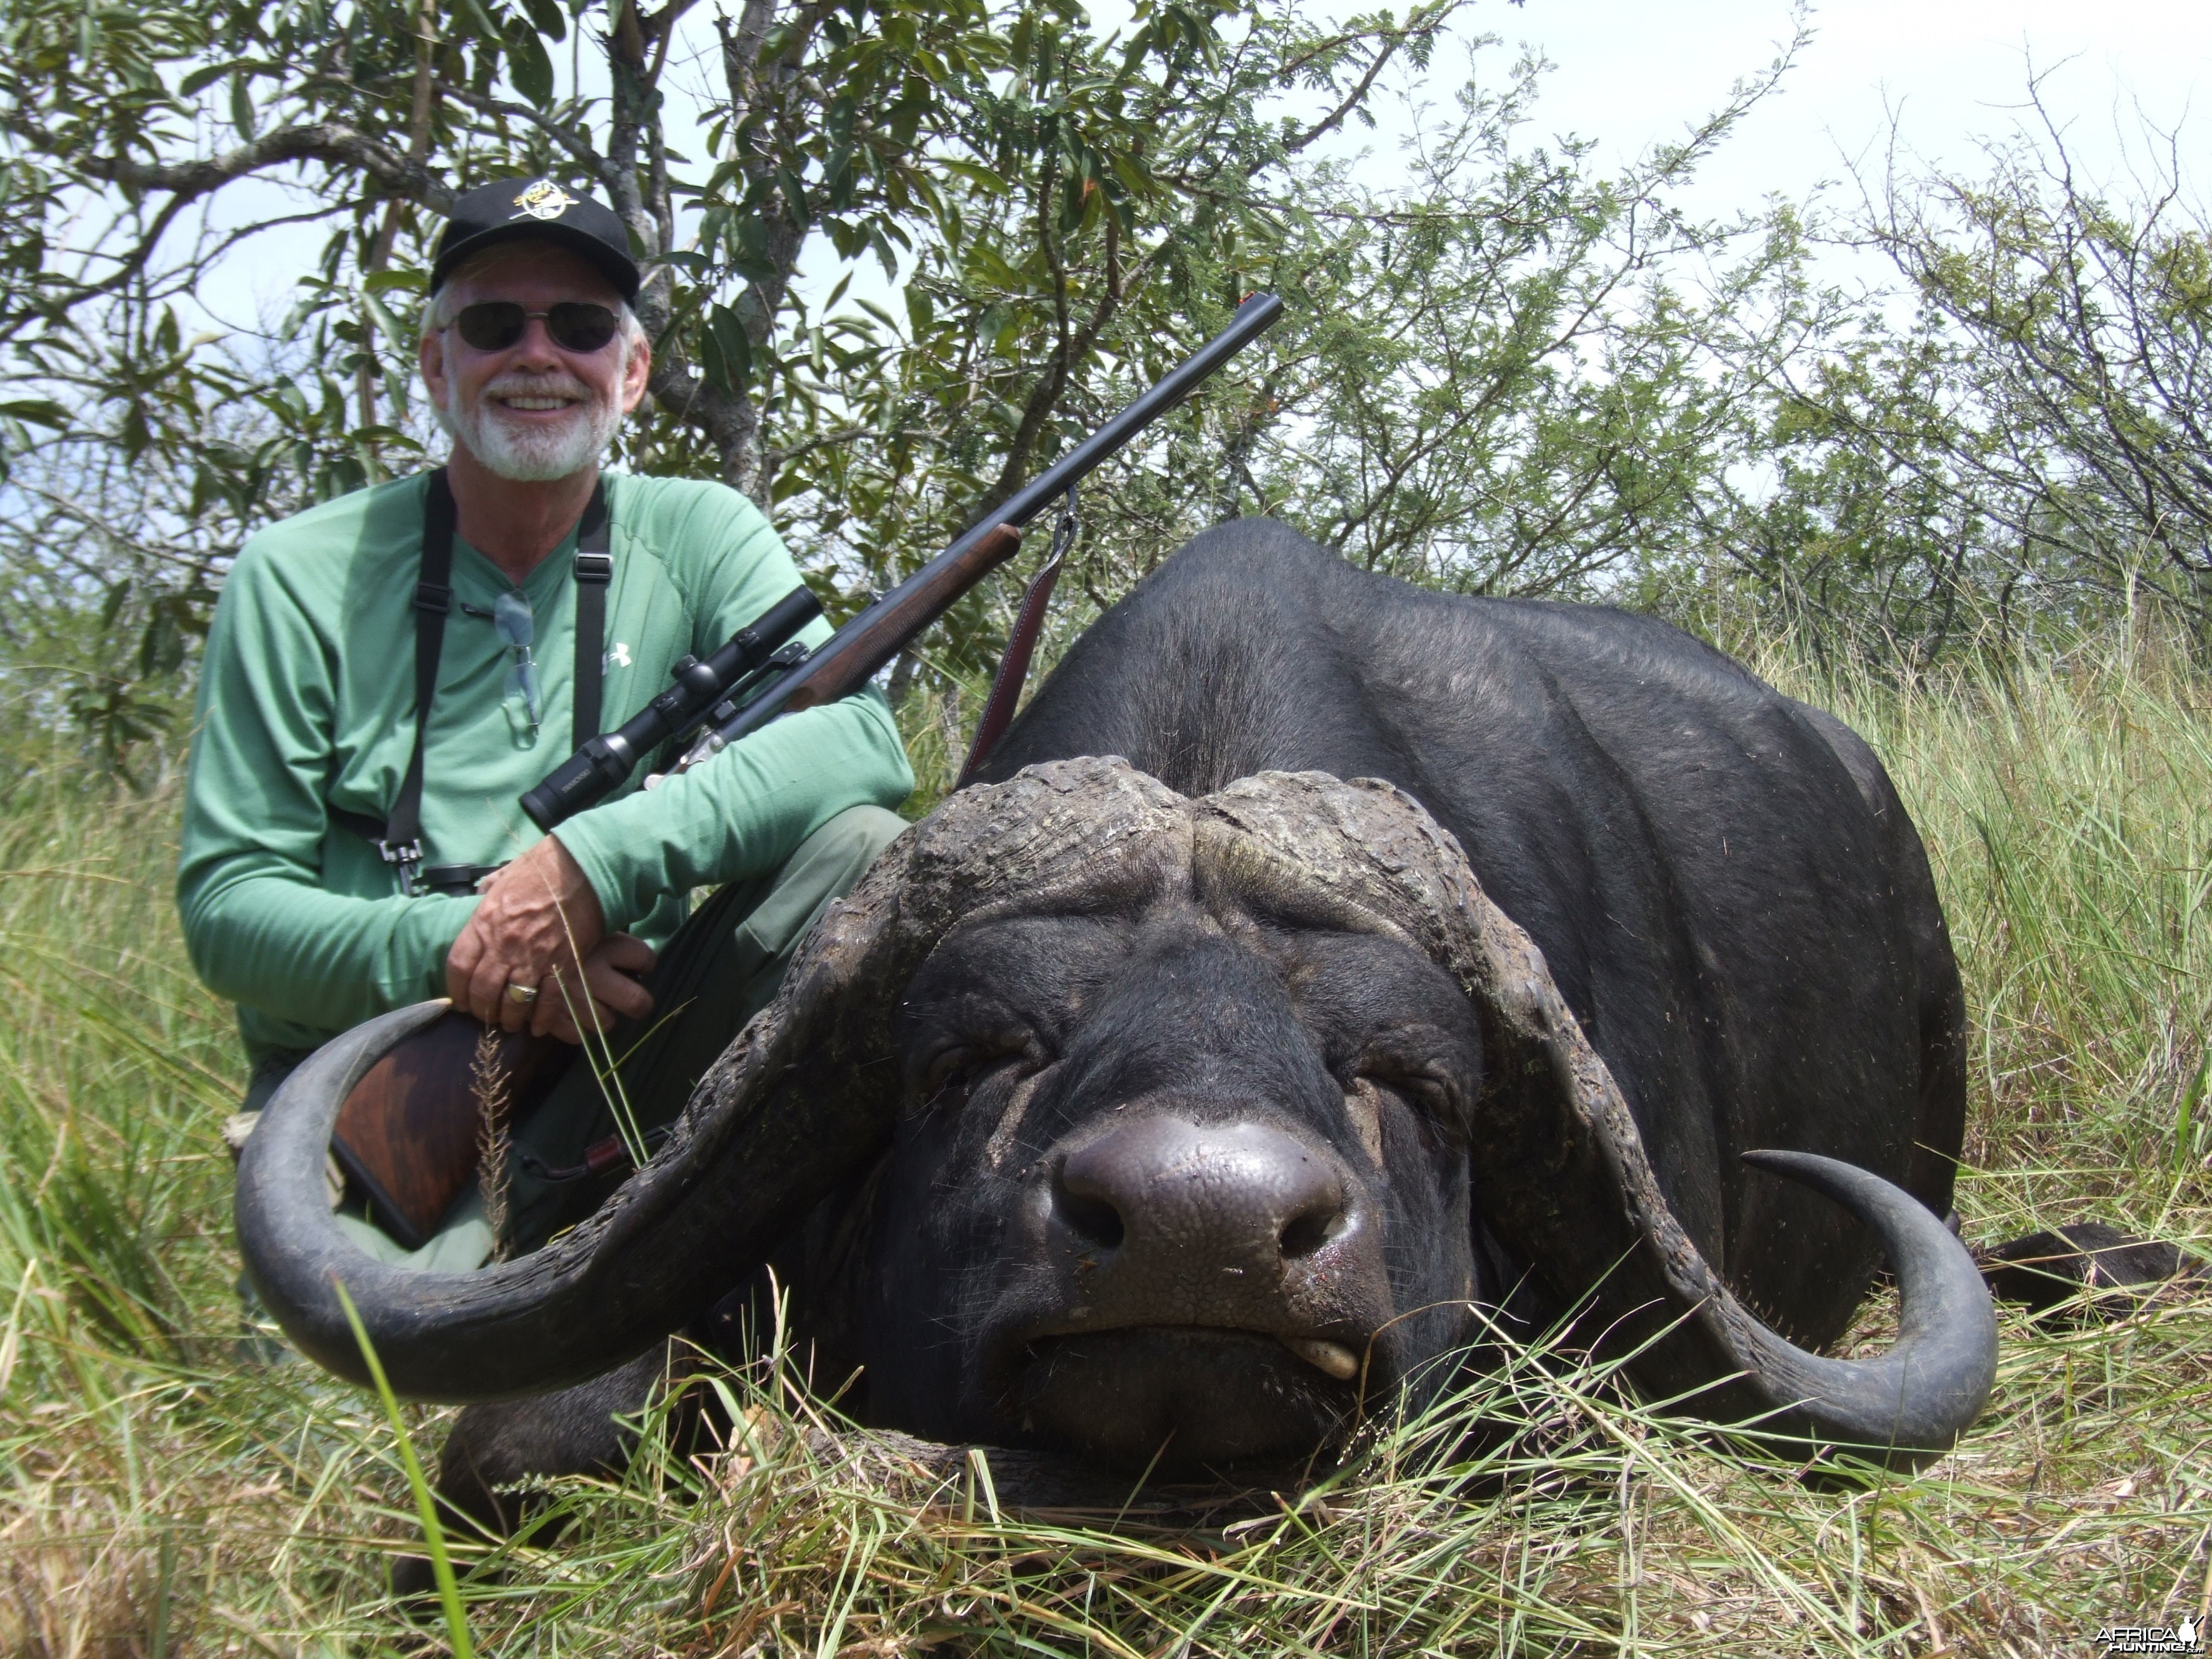 RSA Buffalo from the recent past, Spear Safaris